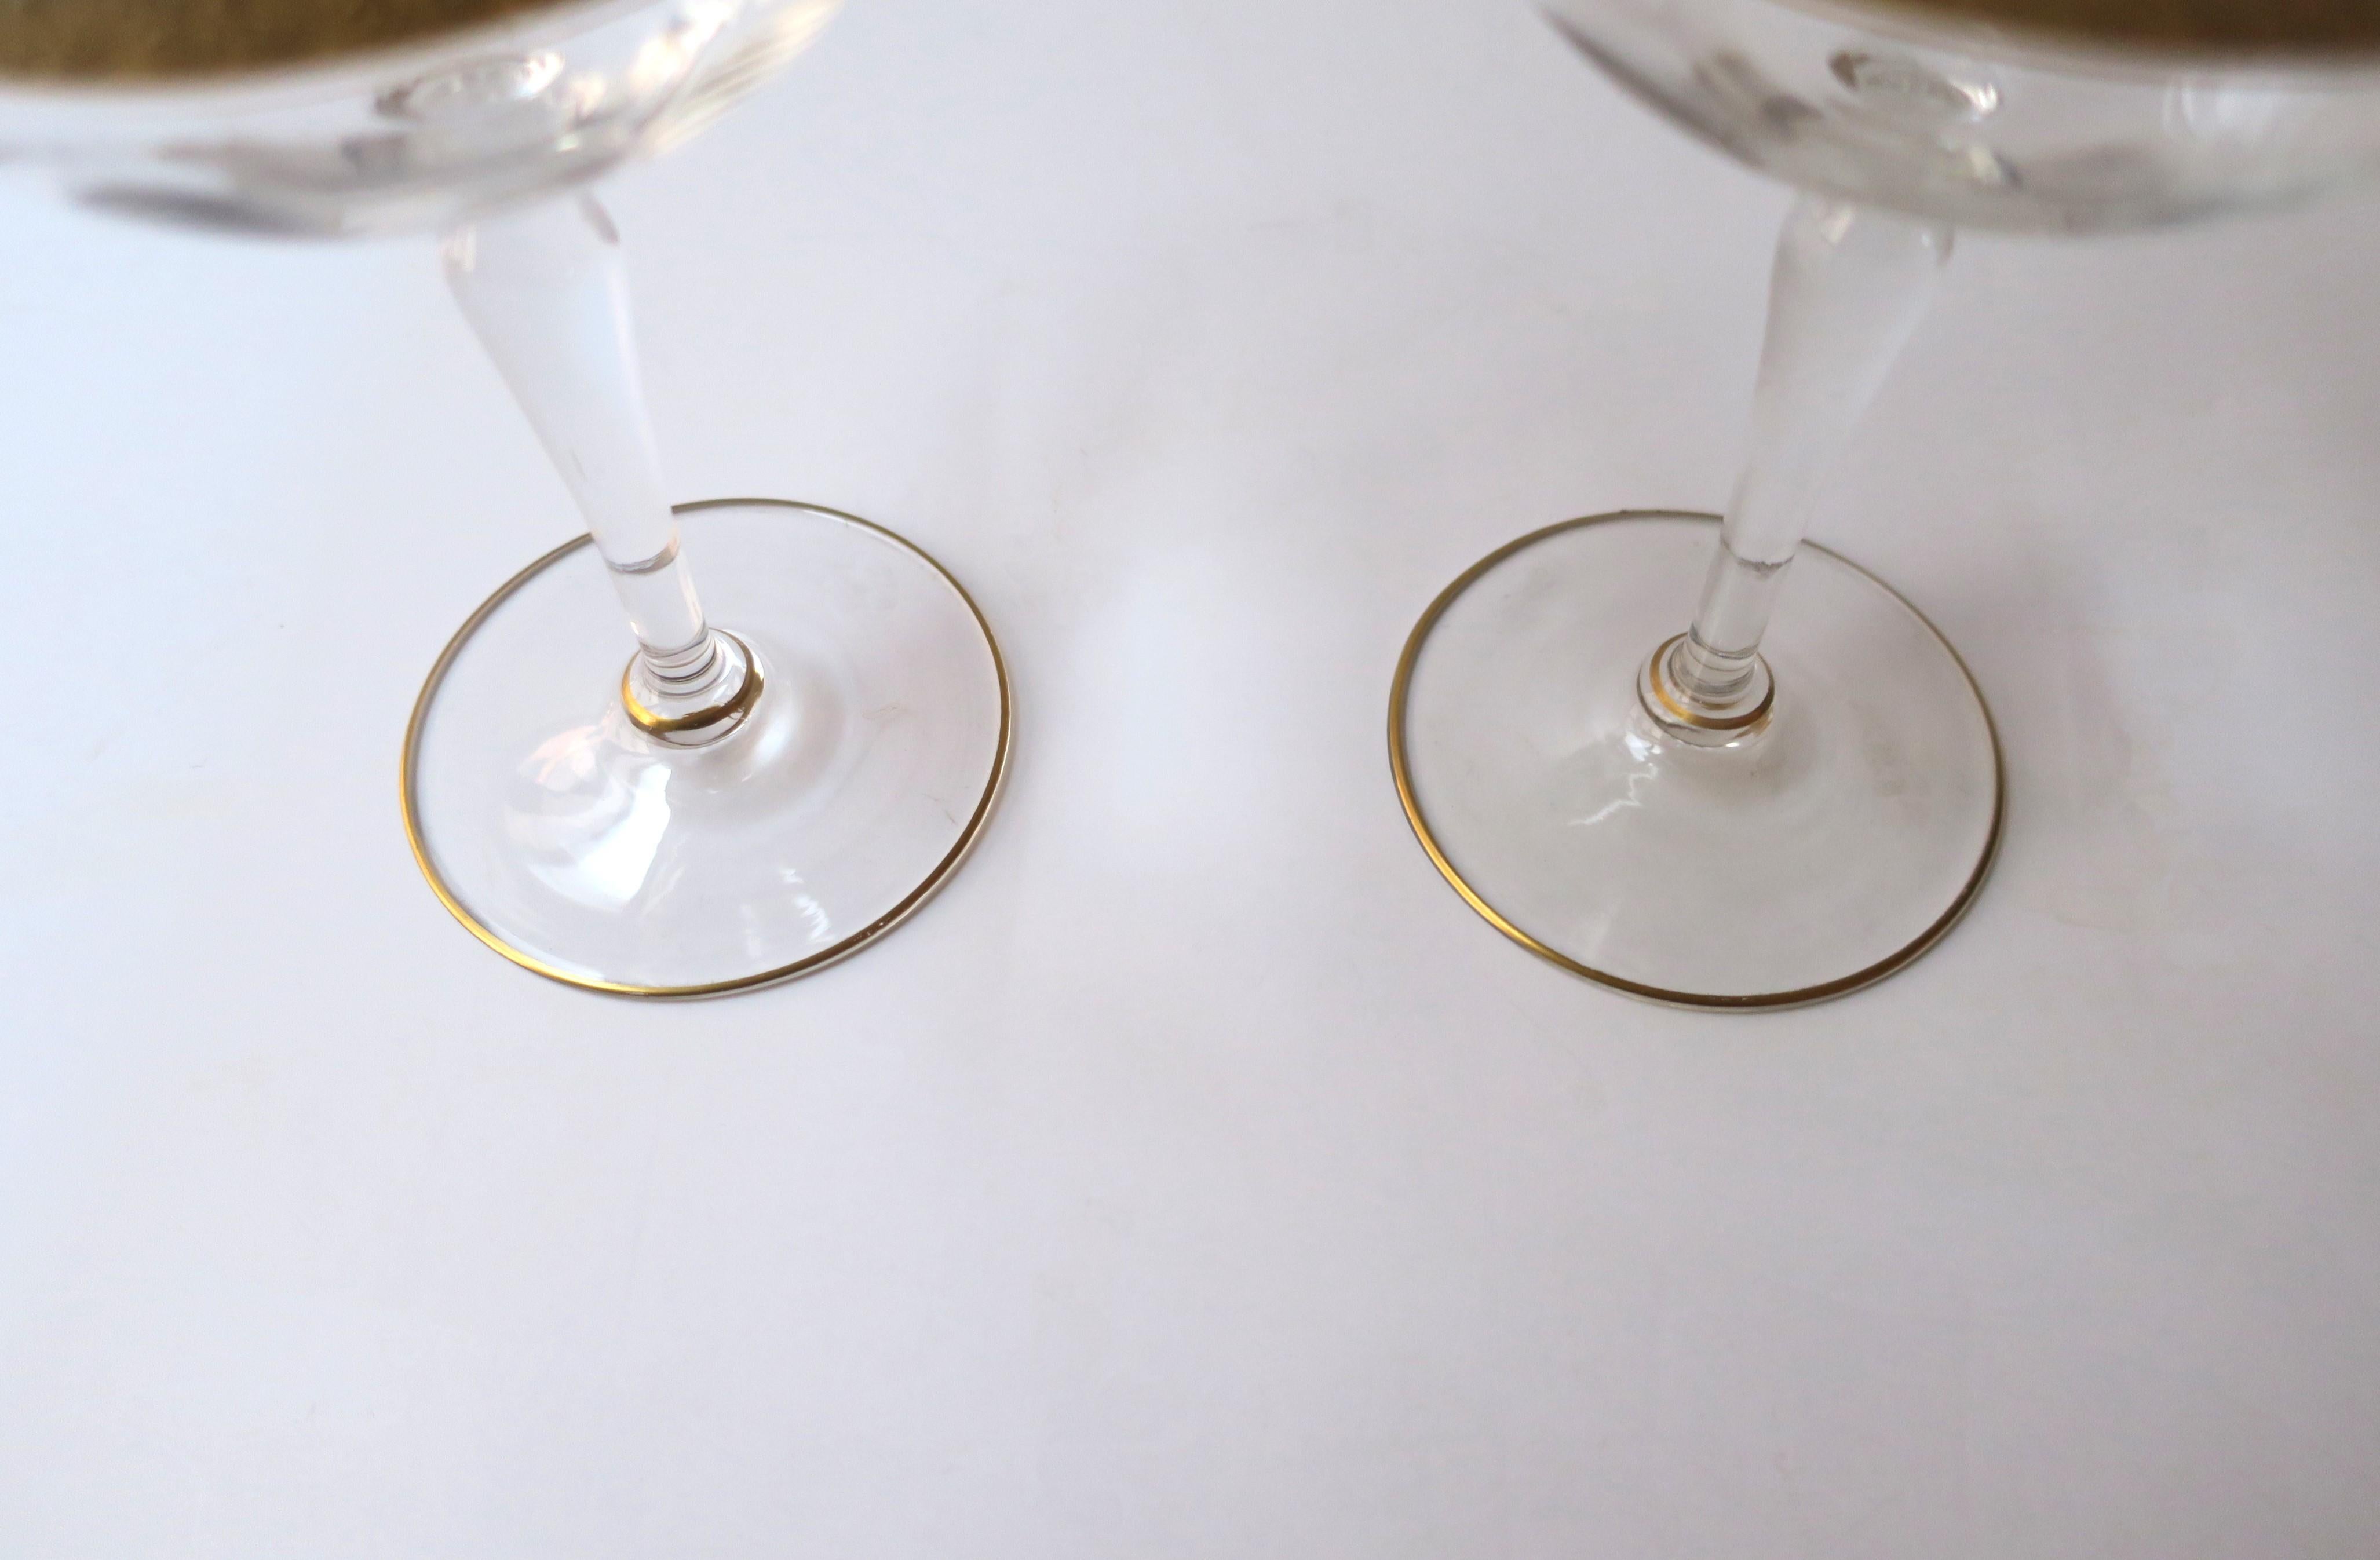 Champagne Coupes Cocktail Glasses with Gold Rim, Pair For Sale 3